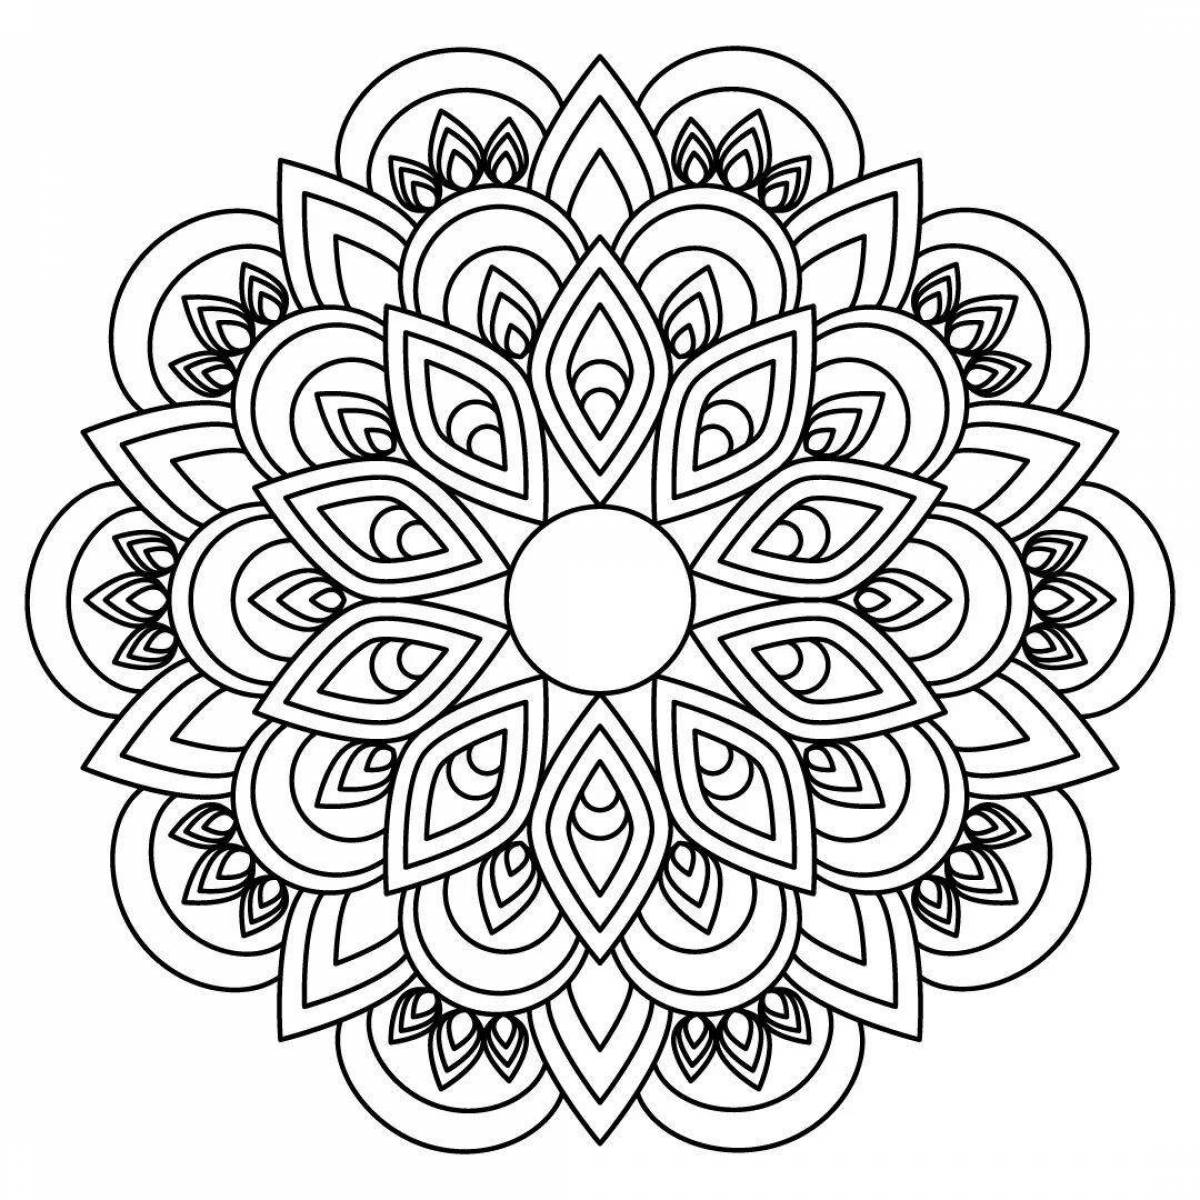 Great mandala coloring to achieve